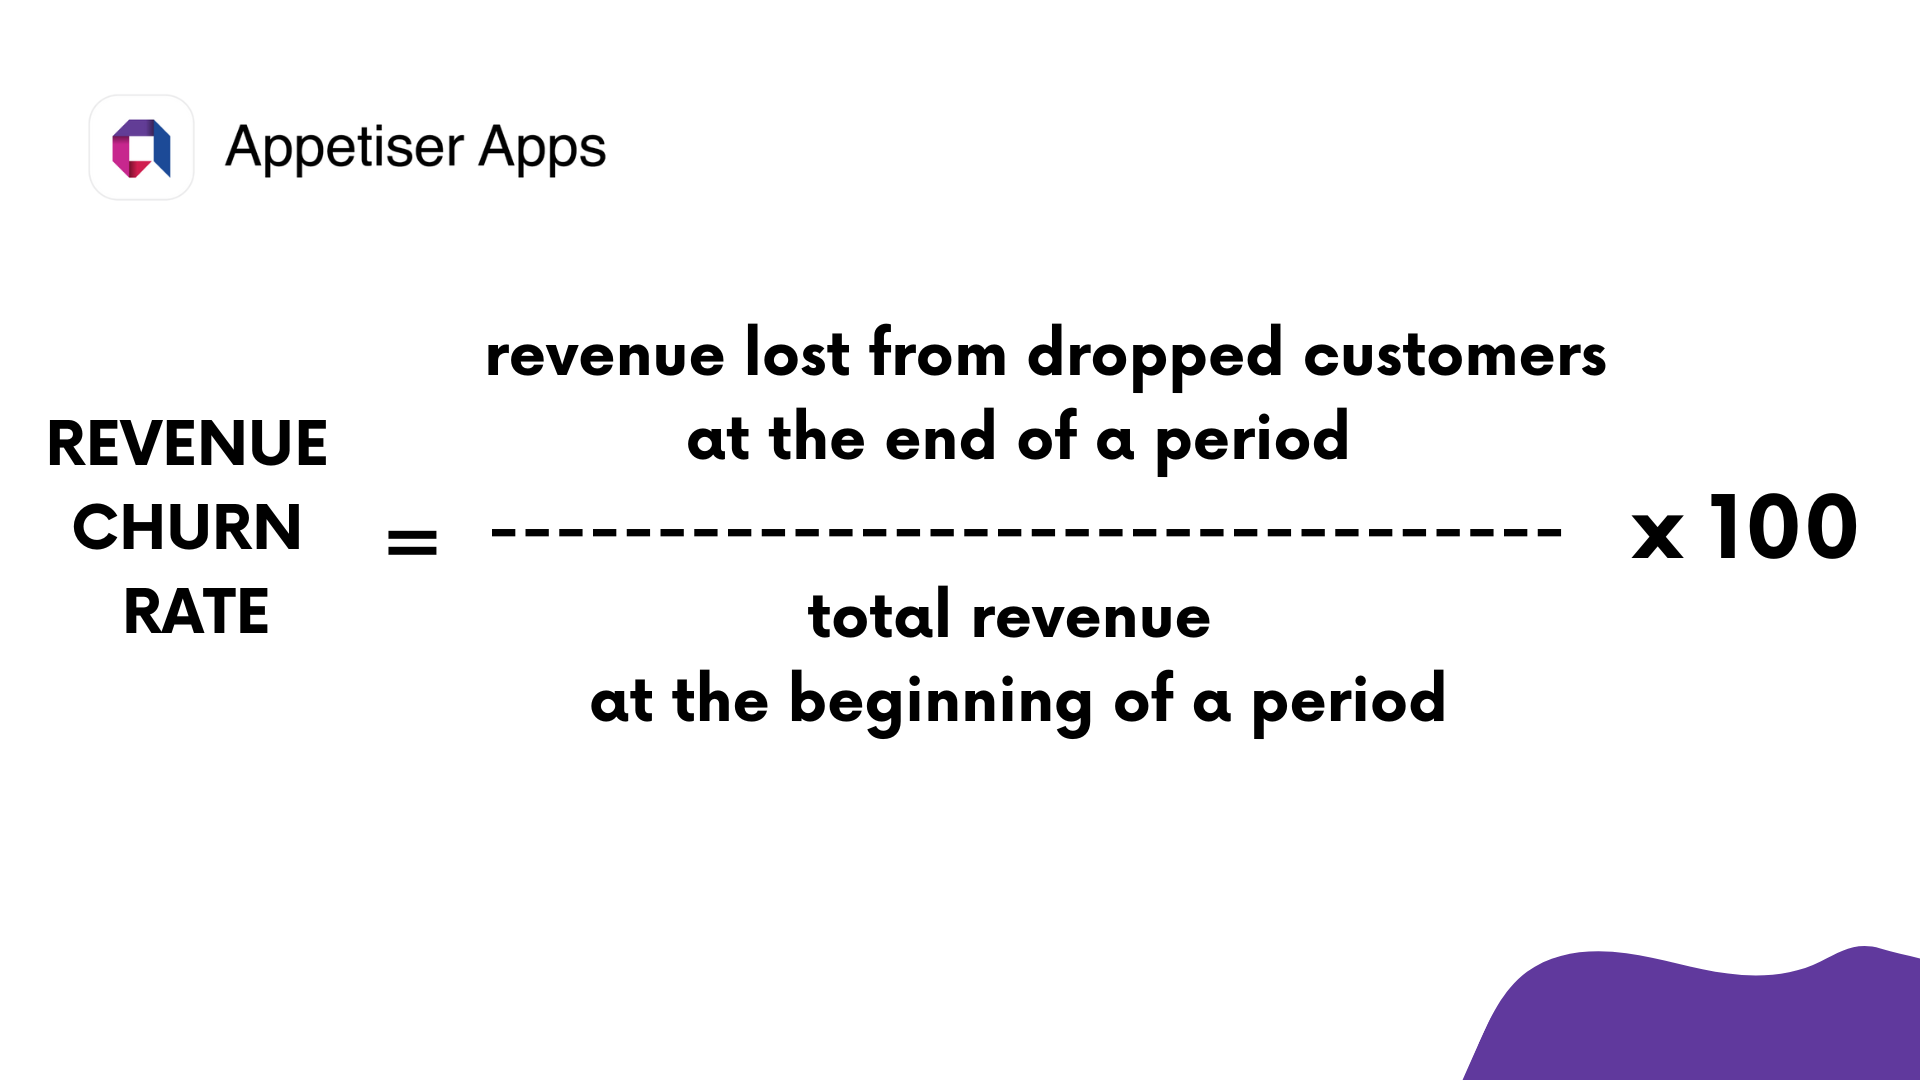 HTMPS: Image showing the formula for Revenue Churn Rate